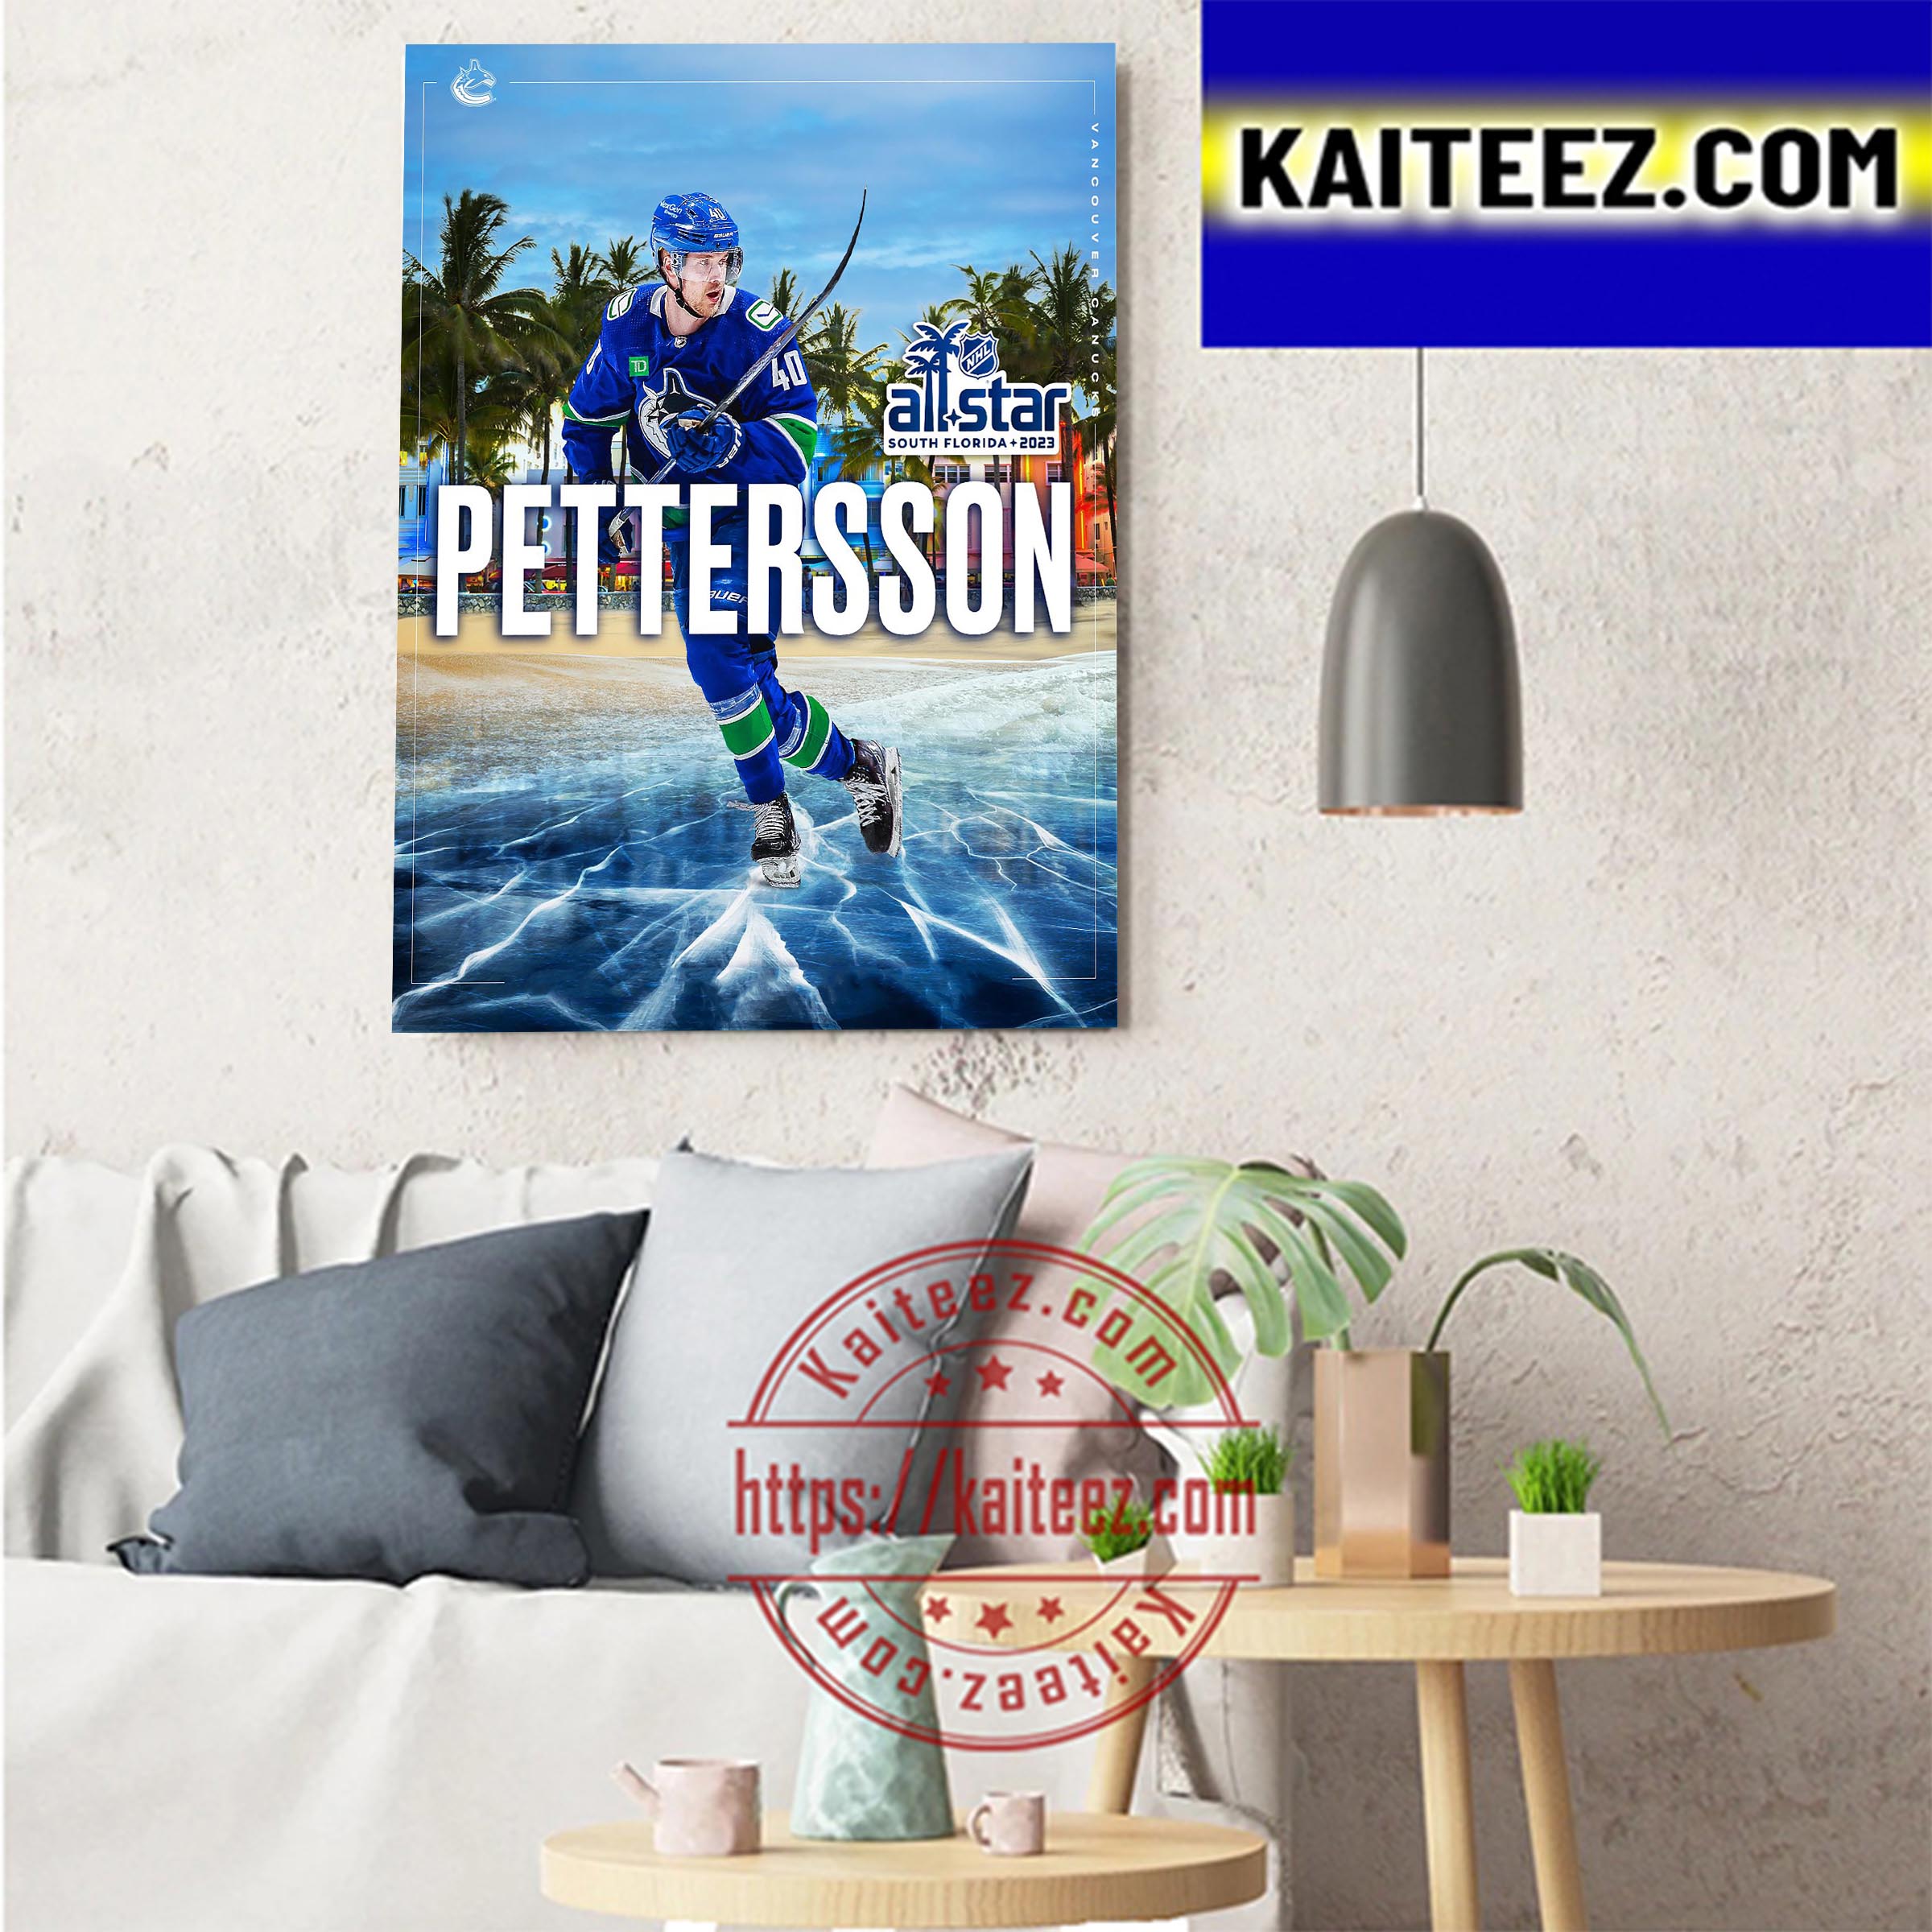 The Vancouver Canucks Elias Pettersson In The 2023 NHL All Star